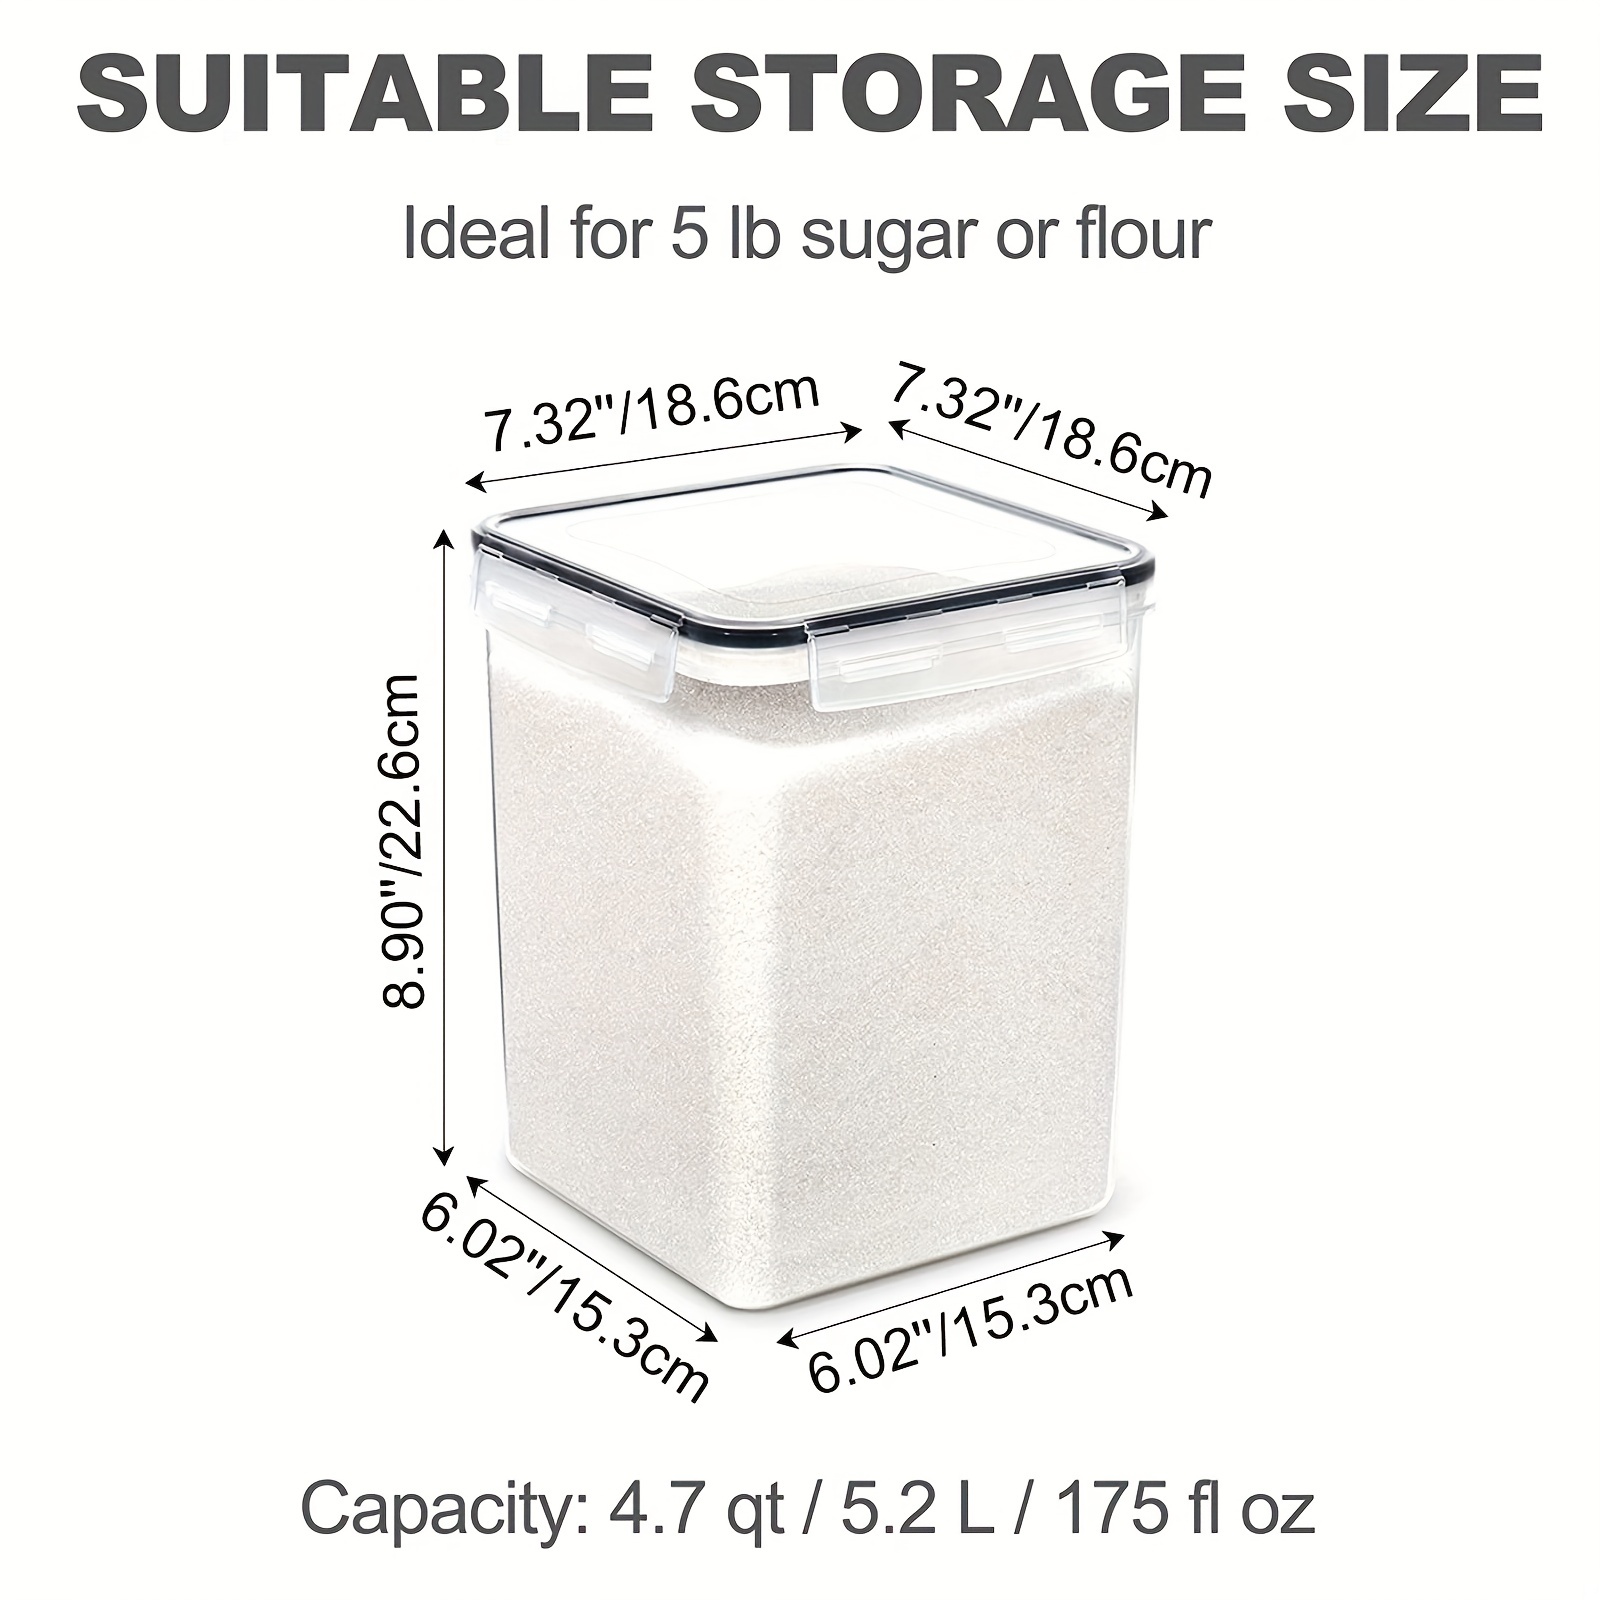 Extra Large Food Storage Containers with Lids Airtight for Flour, Sugar, Rice, Baking Supply Kitchen Pantry Bulk Food Organization, 2.8L